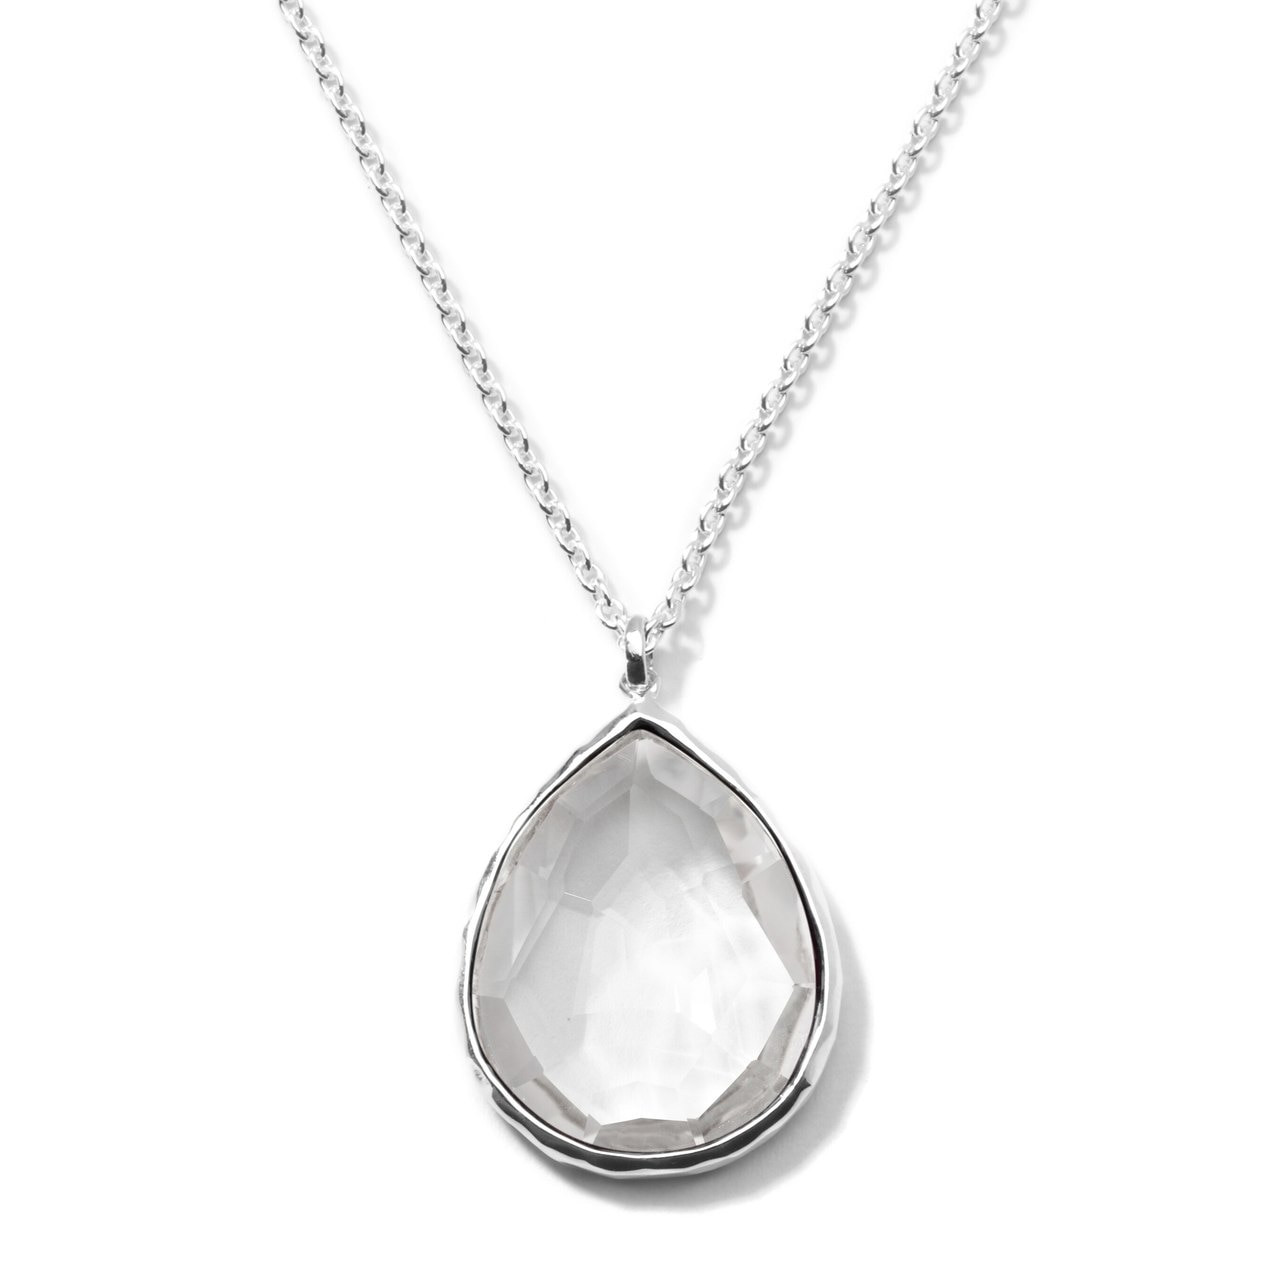 Rock Candy Large Pendant Necklace in Sterling Silver